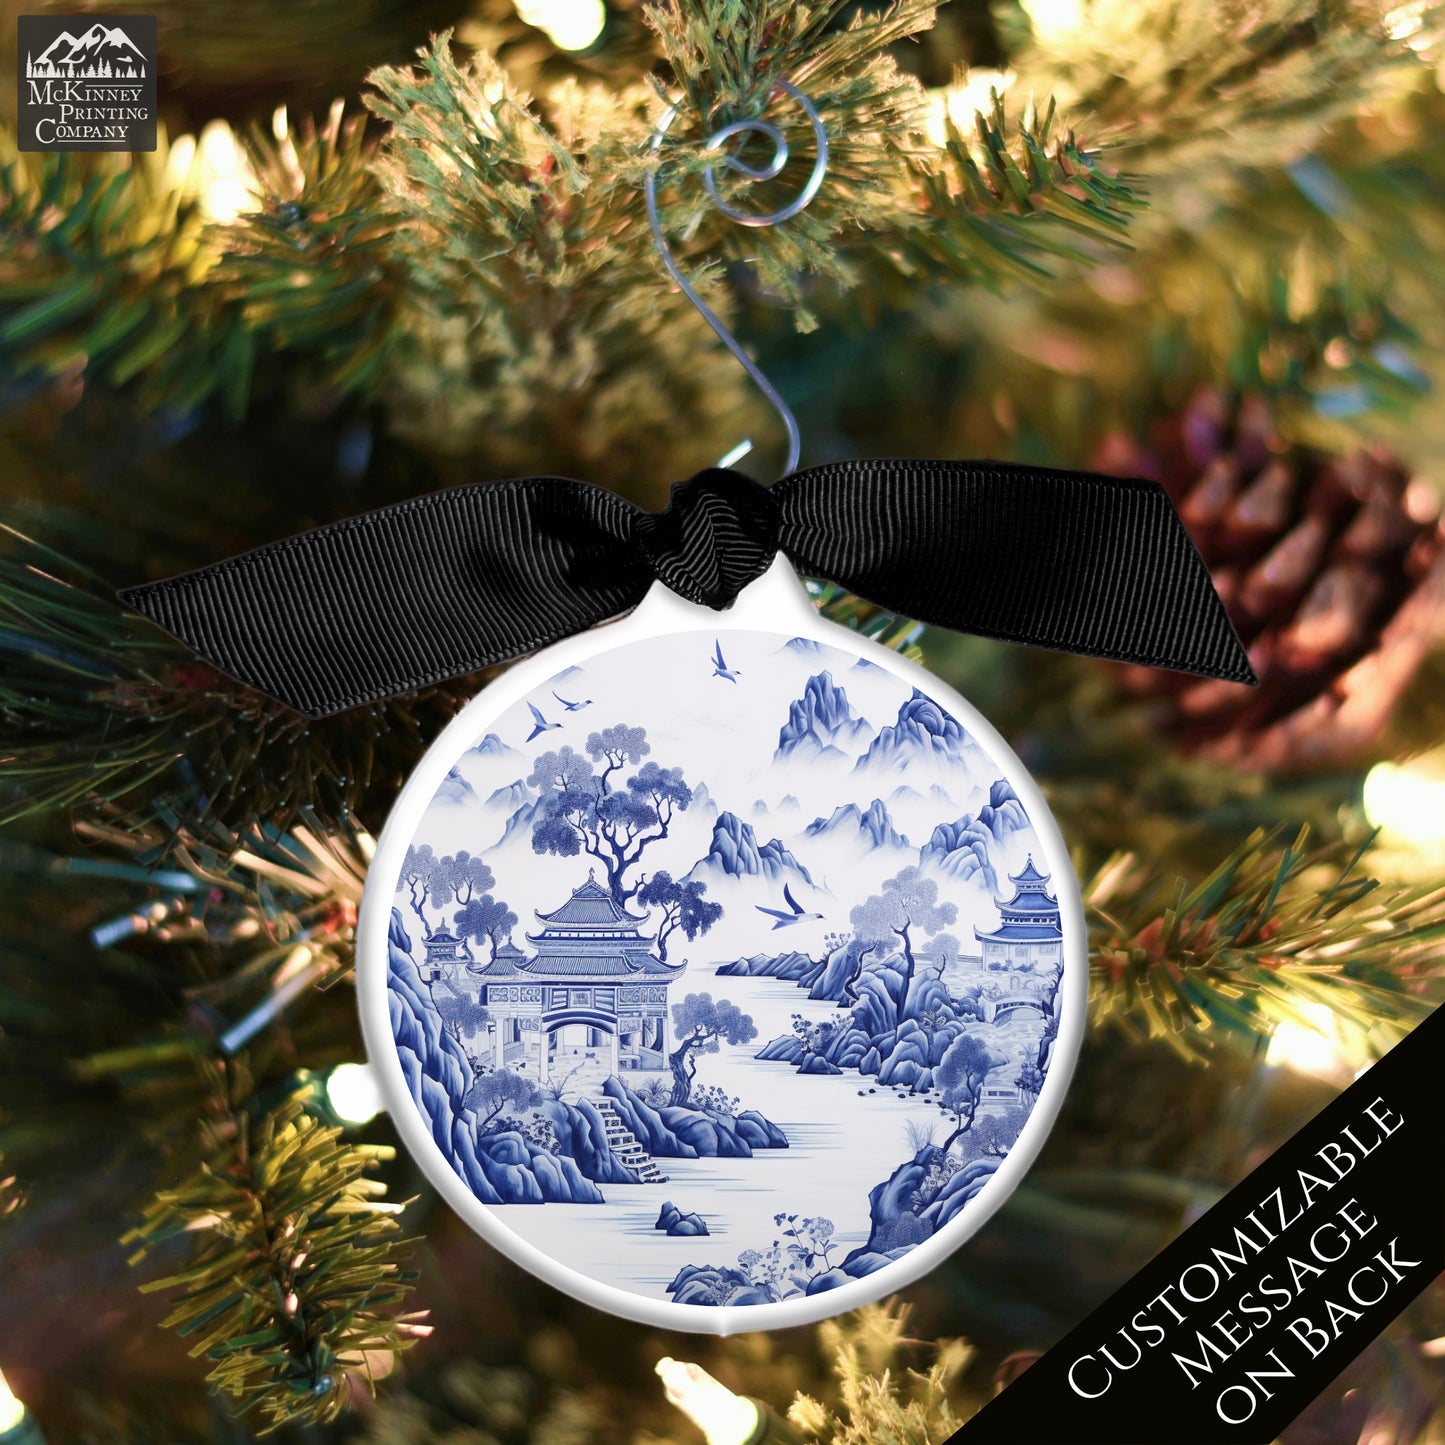 Chinoiserie - Christmas Ornament, Blue and White, Floral, Asian Art